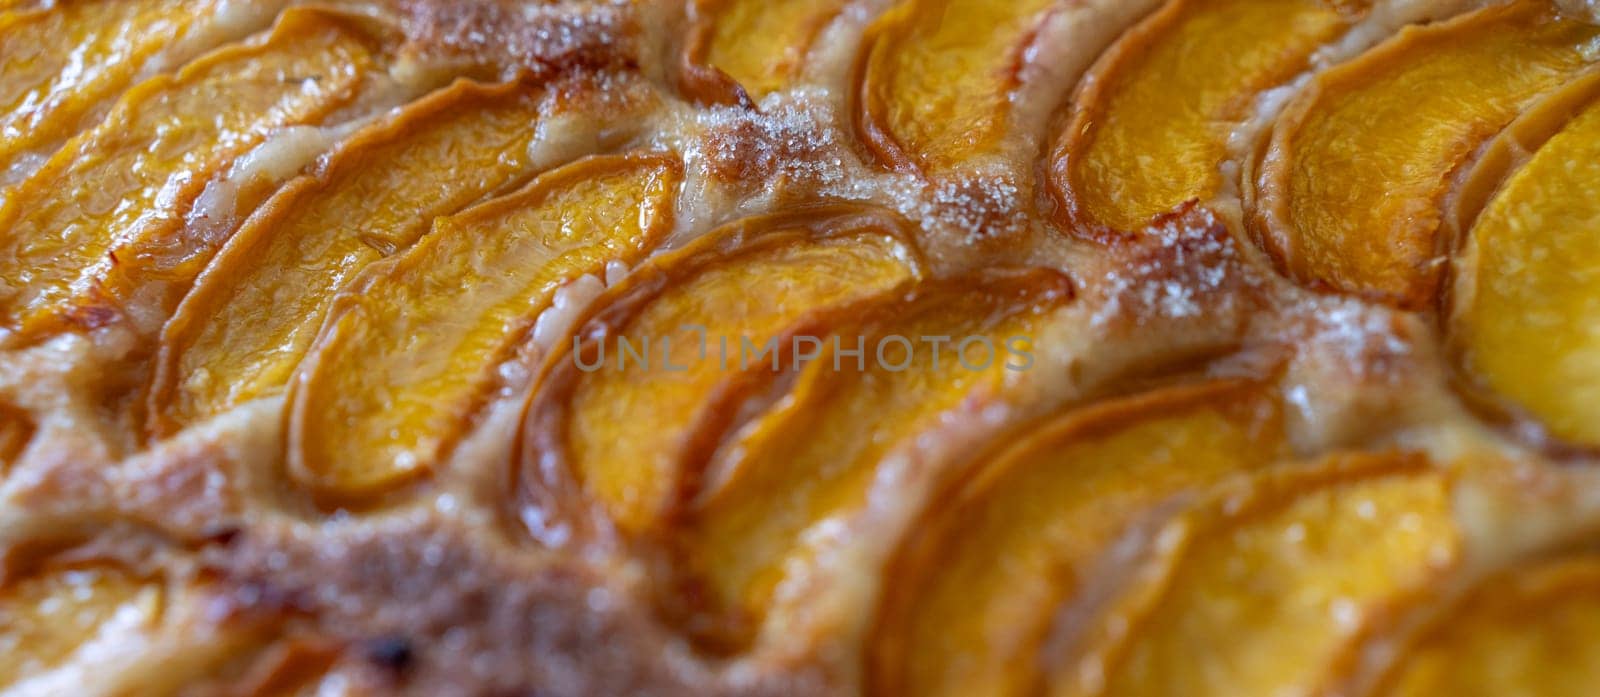 A close up of a dessert made of sliced peach. The dessert is covered in a caramel glaze and has a golden brown crust. The peach are arranged in a spiral pattern, creating a visually appealing.